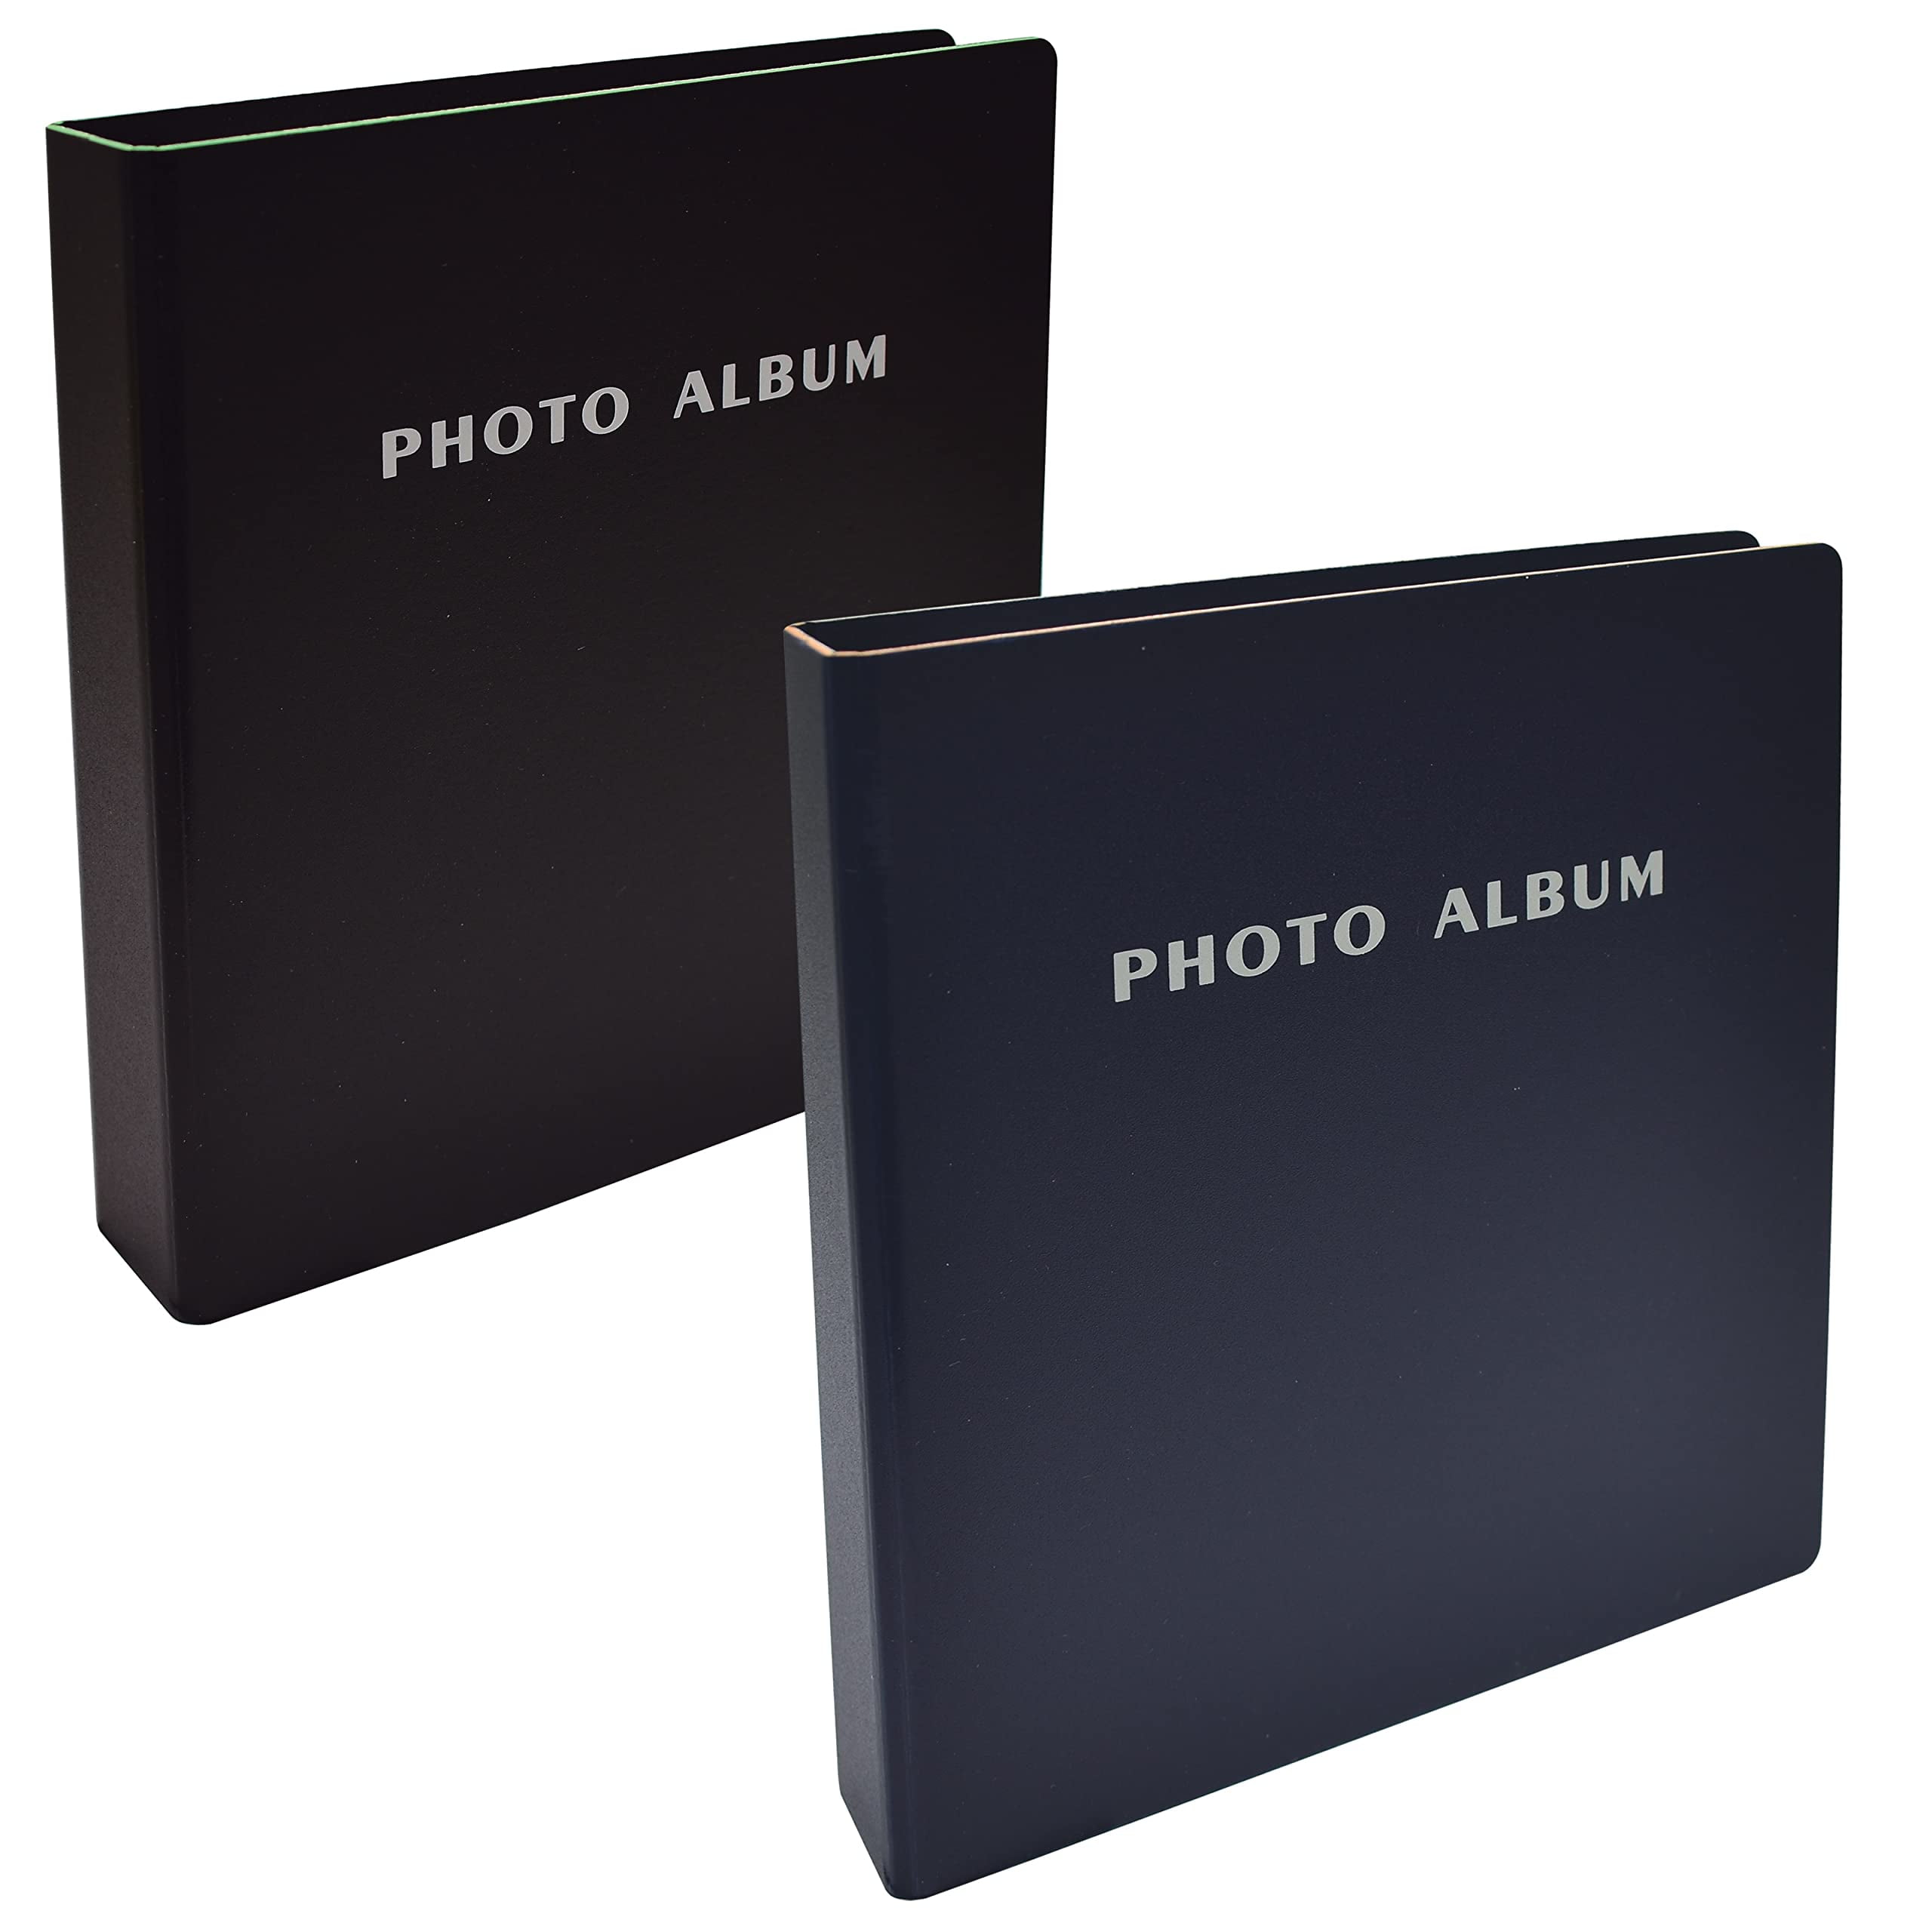  NESCL Small Photo Album 5x7 2 Pack Each Holds 56